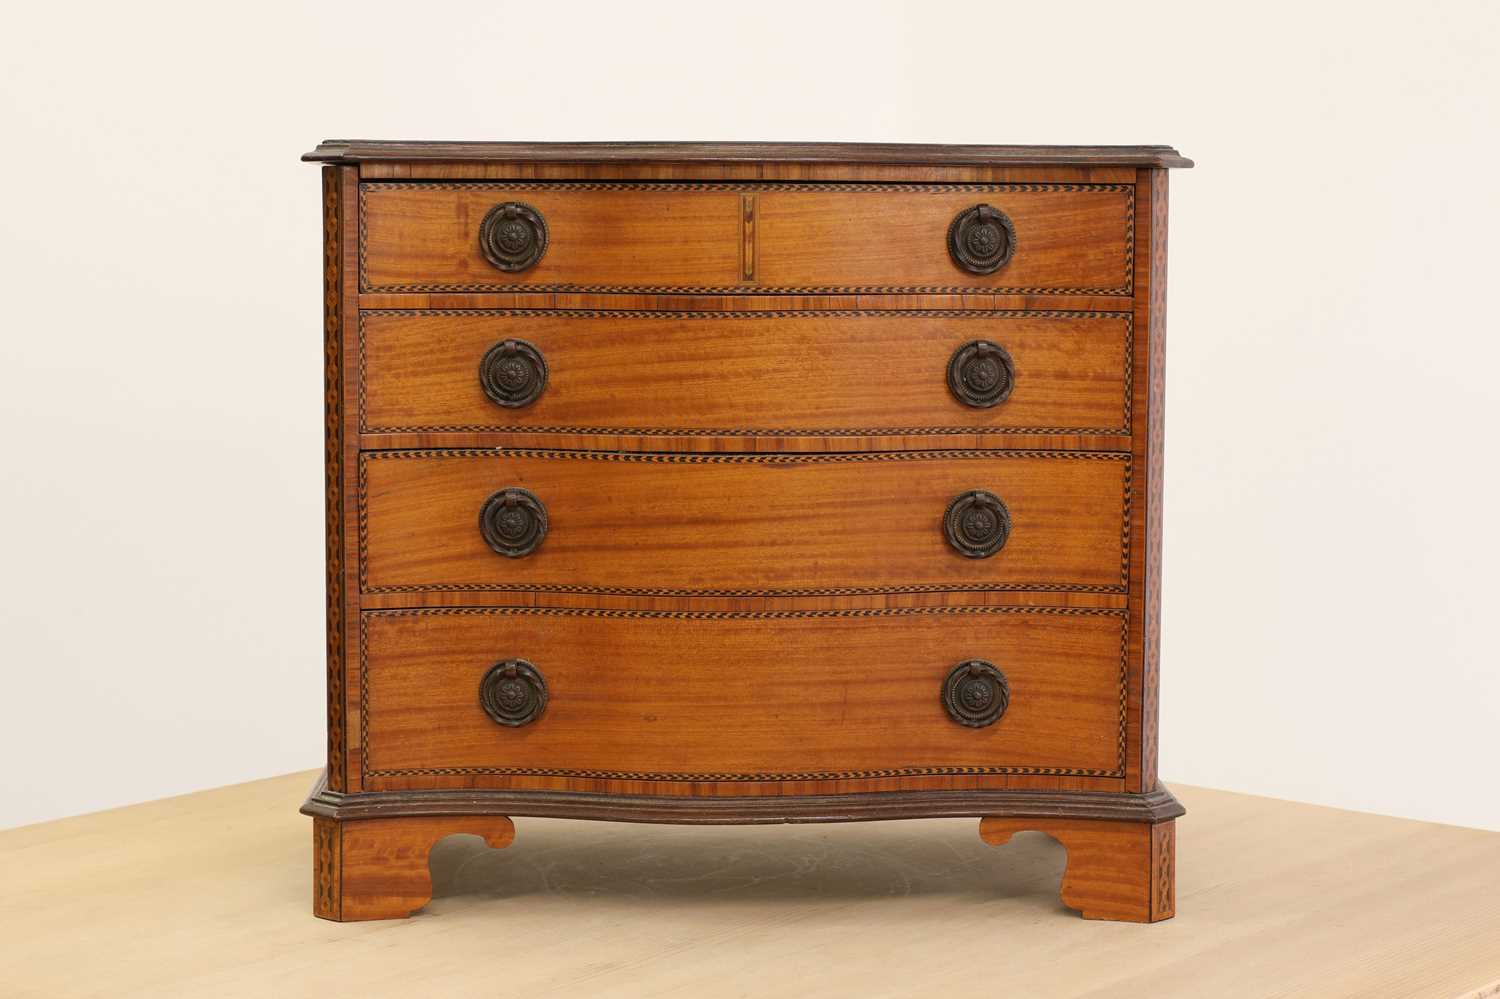 Lot 240 - A George III-style inlaid satinwood miniature chest of drawers